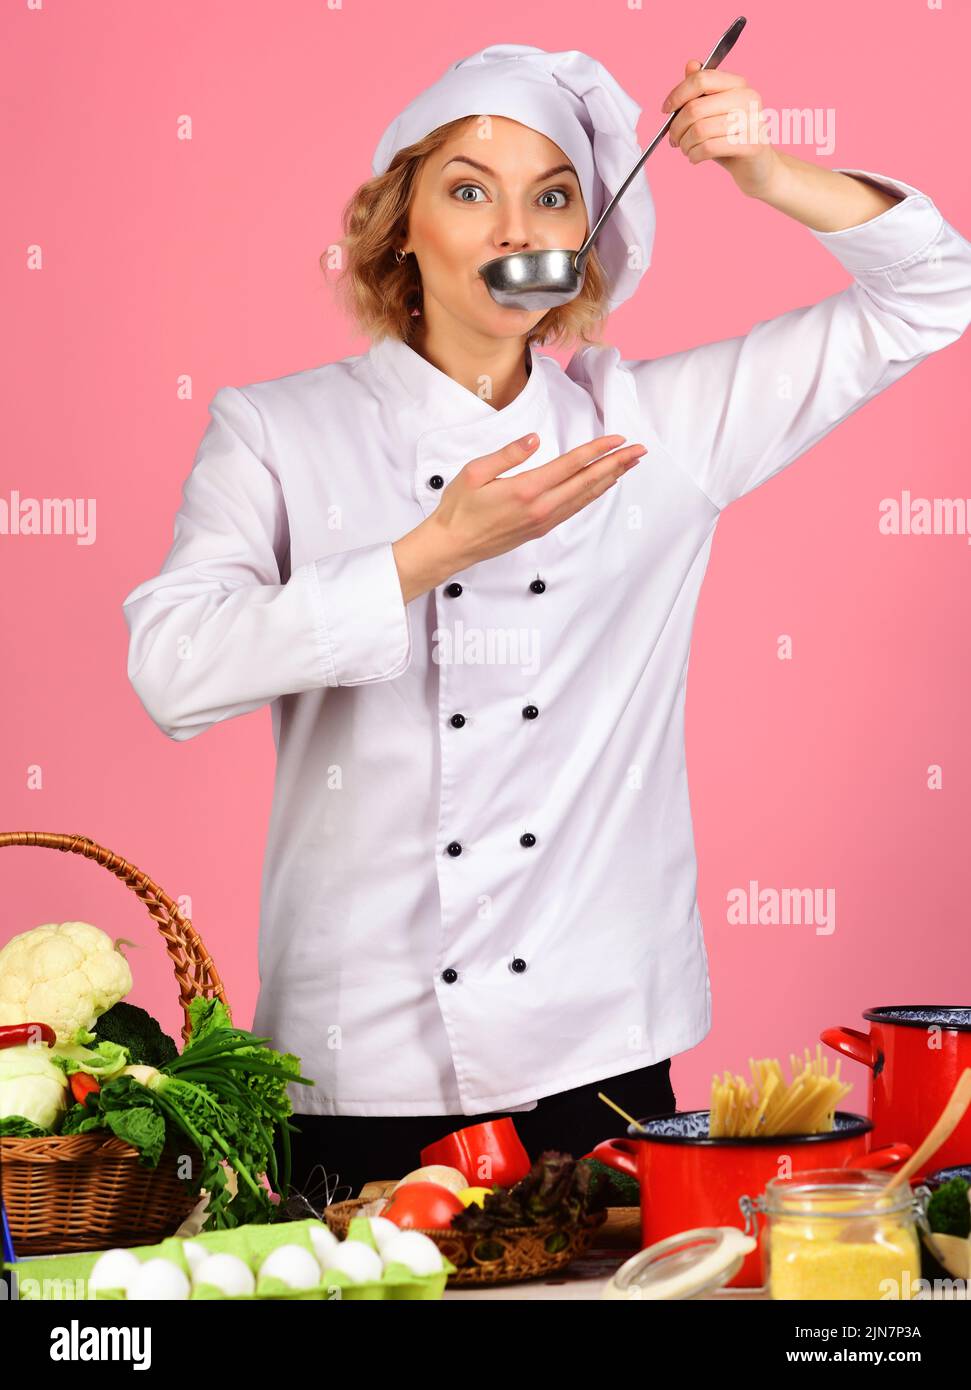 Female chef in white uniform with ladle spoon. Cooking and professional culinary. Food preparation. Stock Photo